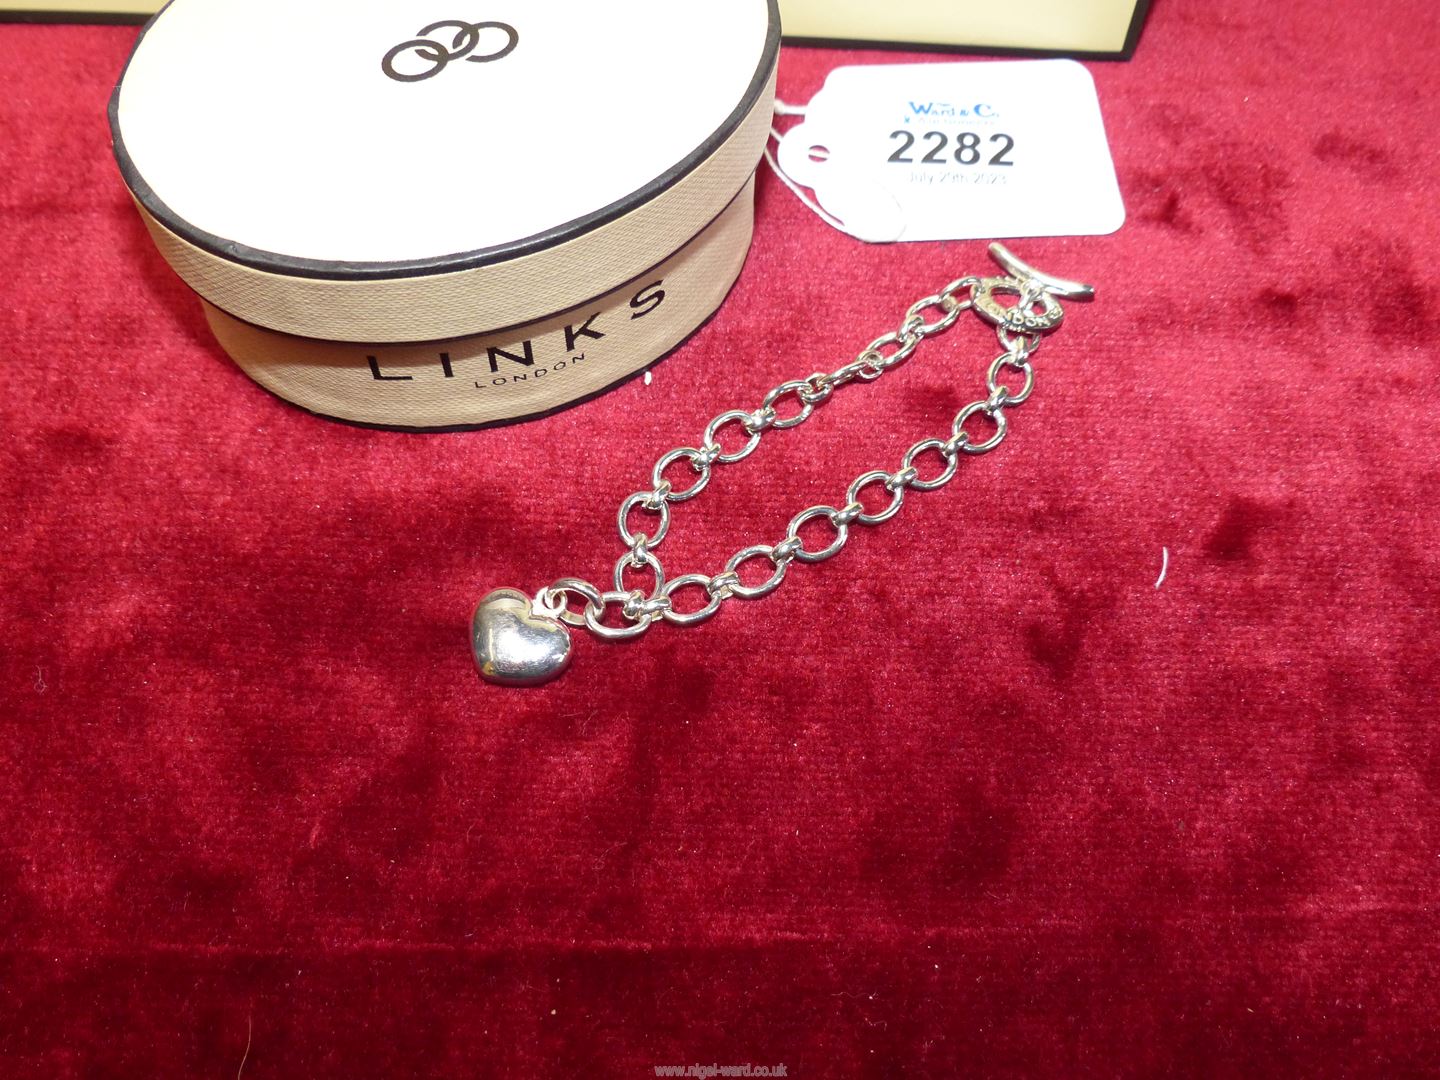 A Links of London 925 'T' bar bracelet with heart charm, cloth pouch, box and gift bag. - Image 3 of 3